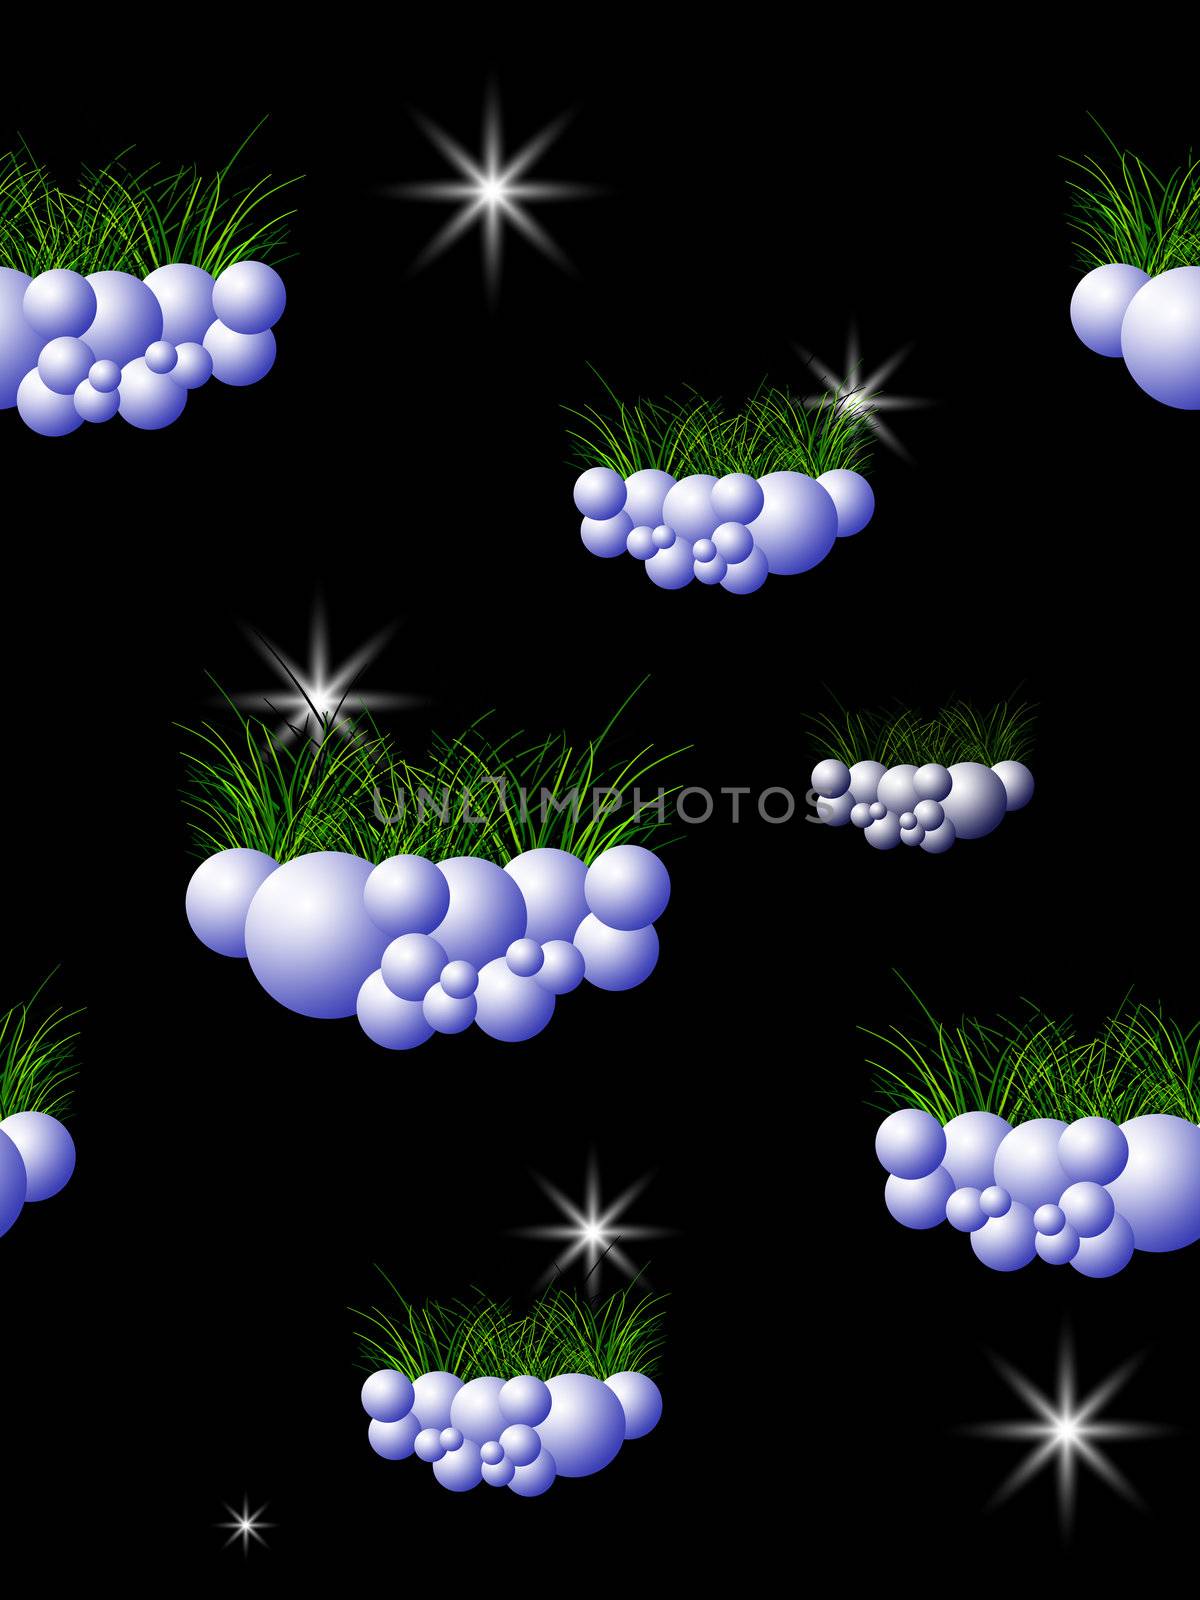 clouds and grass pattern; abstract seamless texture; vector art illustration; image contains transparency